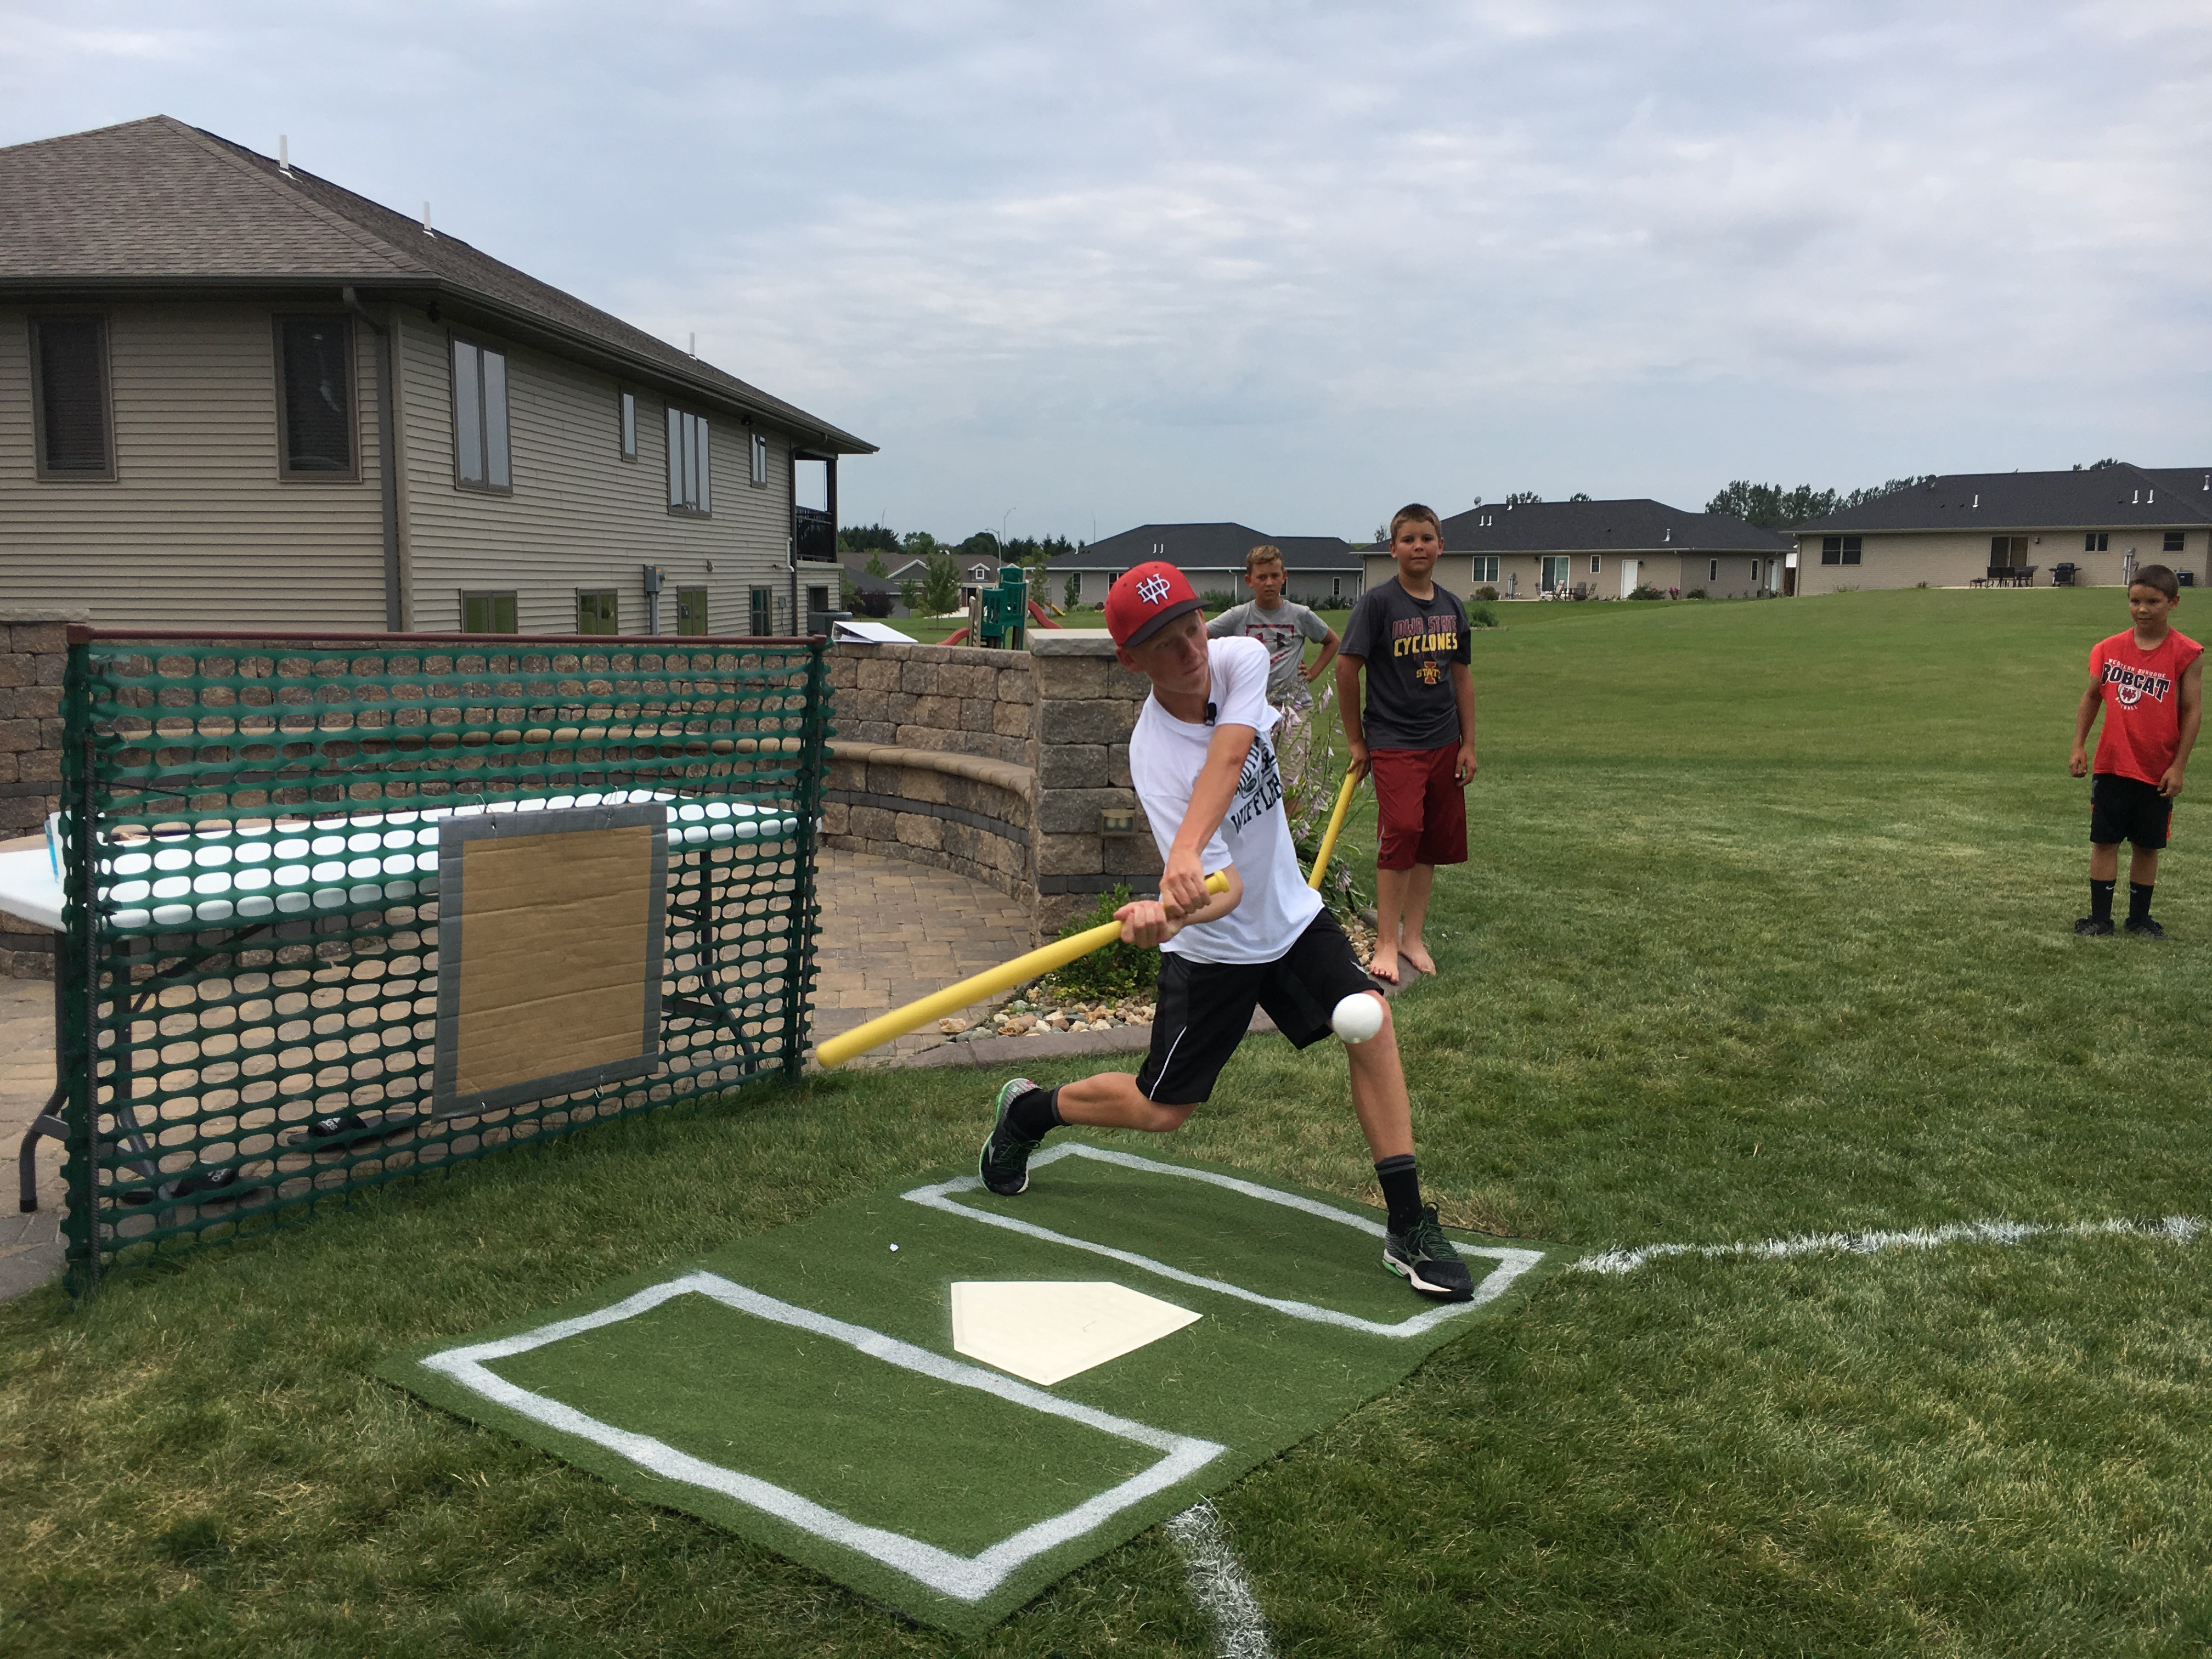 Teen Turns Familys Backyard Into A Wiffle Ball League intended for size 4032 X 3024